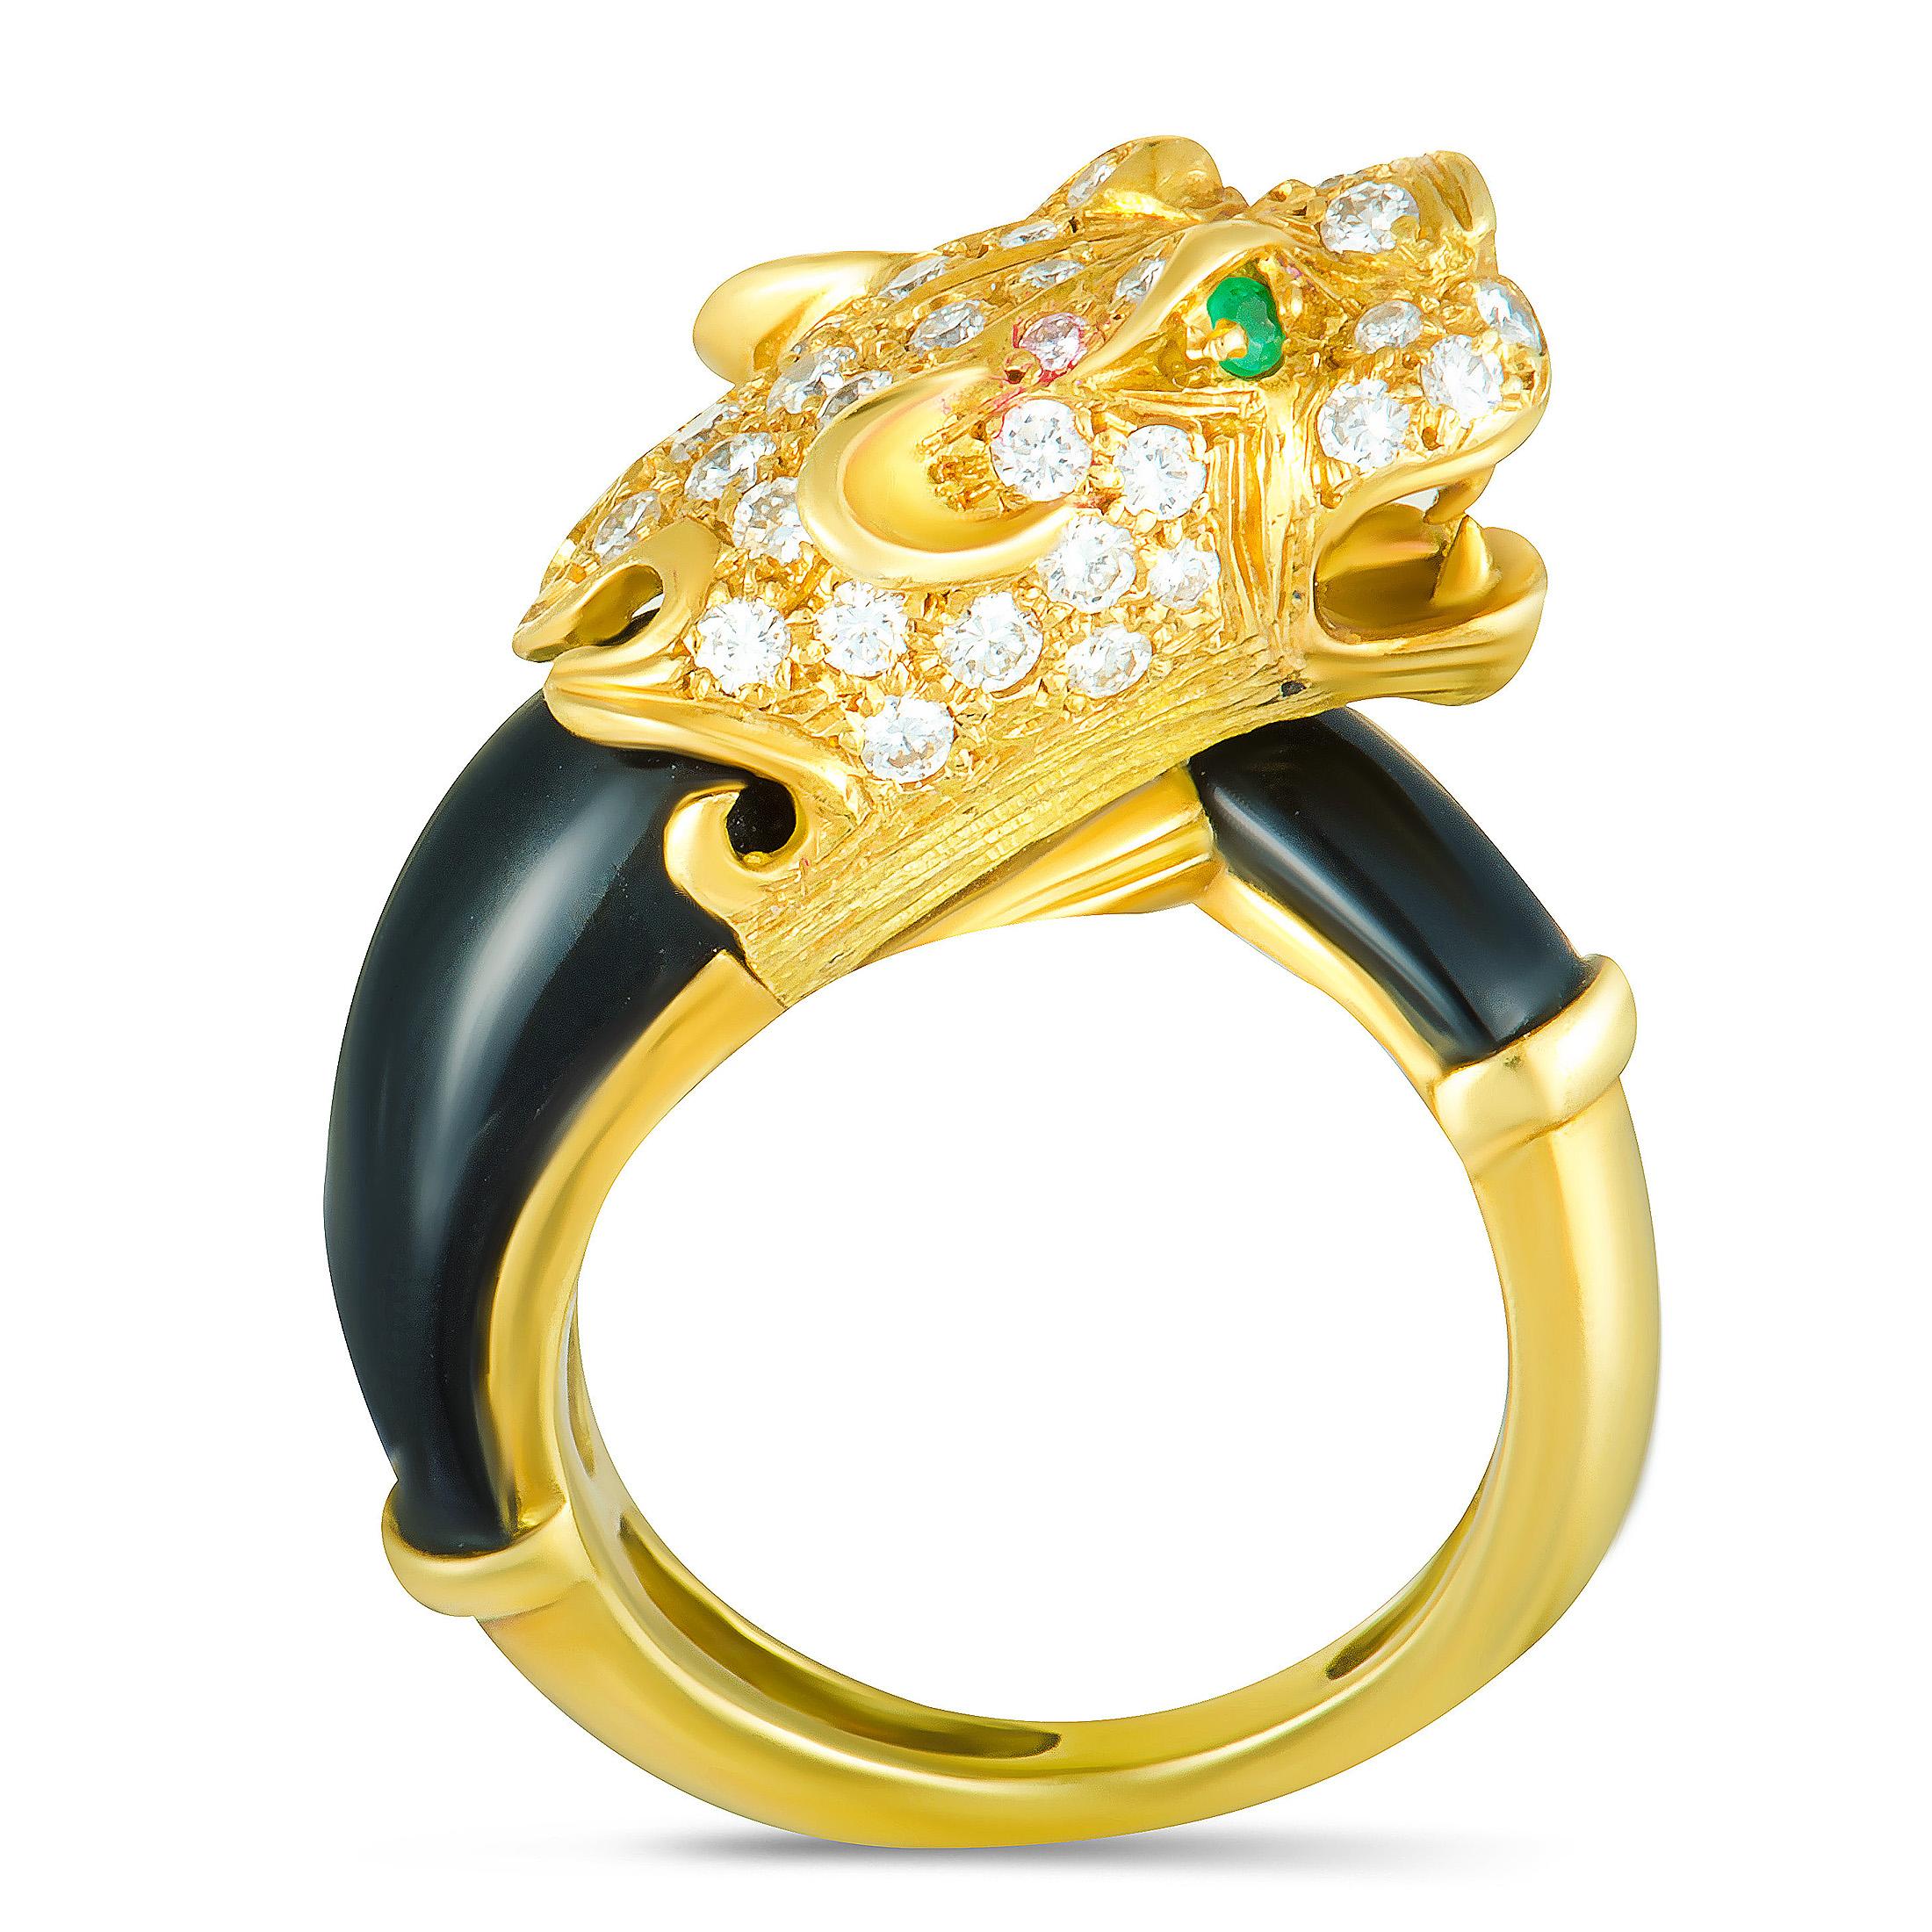 Depicting a panther in a compellingly luxurious manner, this stunning ring designed by J. P. Bellin will add an attractive fashionable twist to any ensemble of yours. The ring is expertly crafted from 18K gold and it is embellished with striking